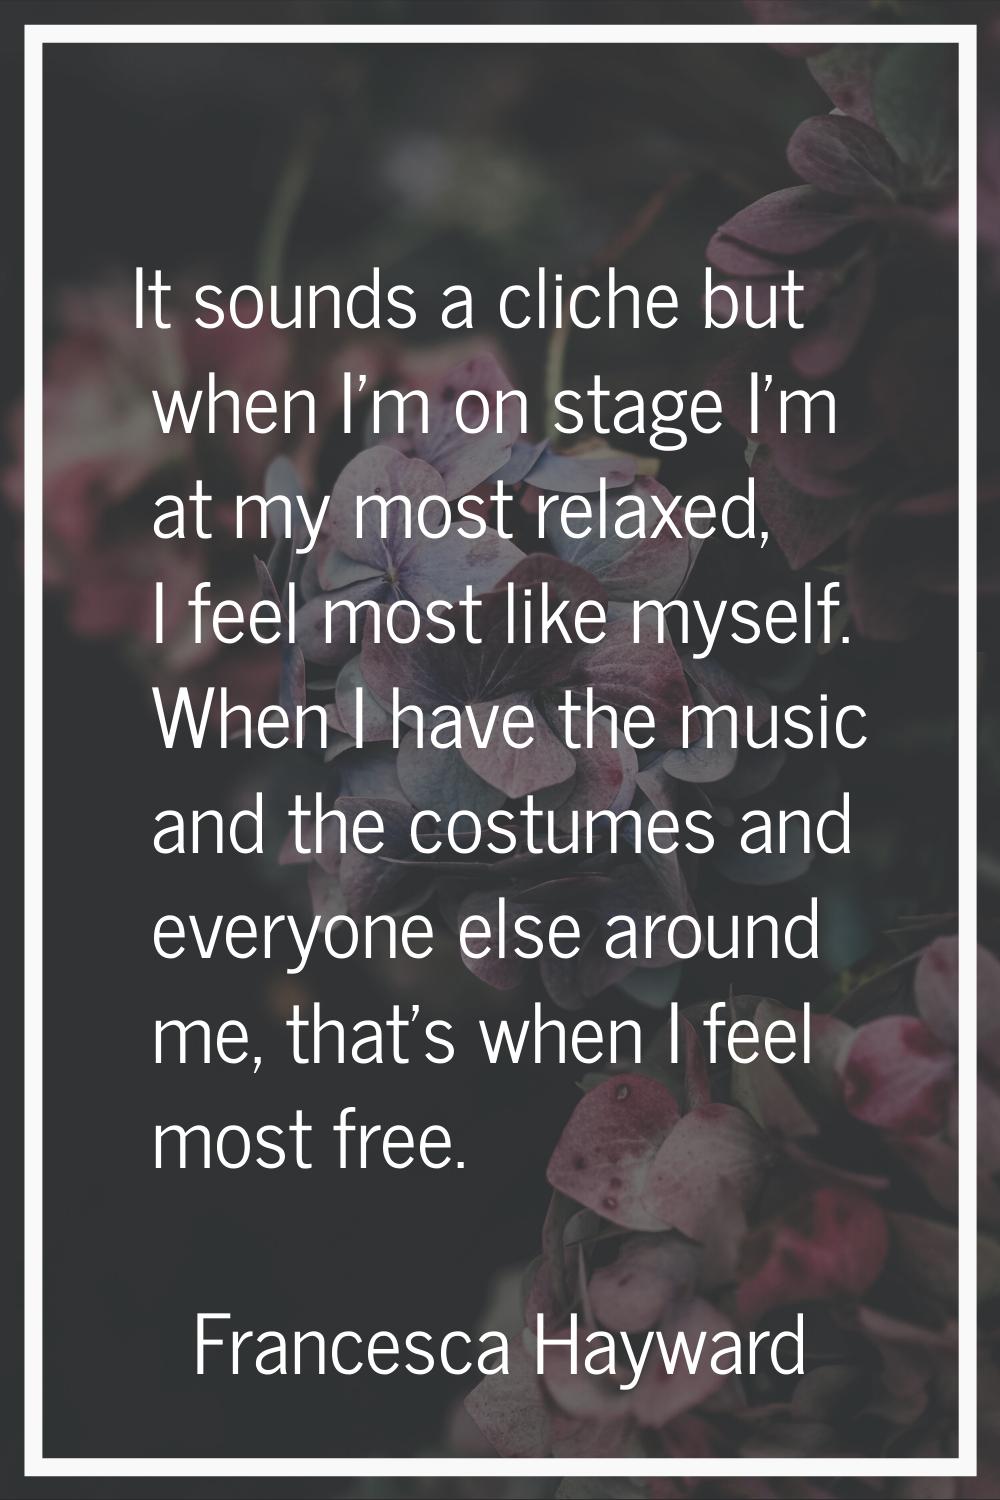 It sounds a cliche but when I'm on stage I'm at my most relaxed, I feel most like myself. When I ha